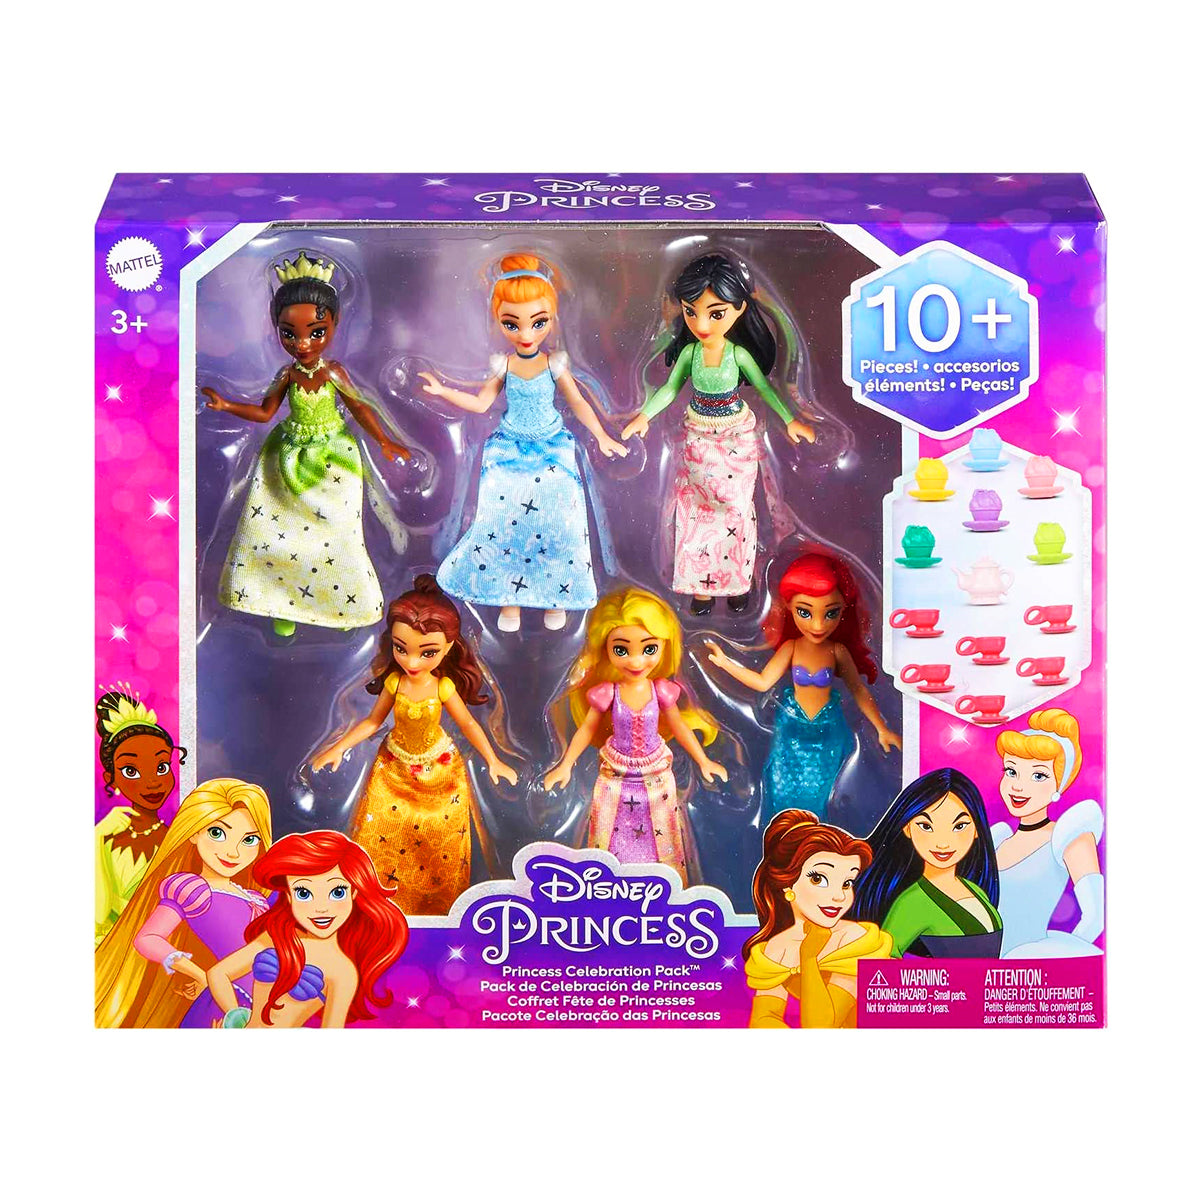 Disney Princess Toys, 6 Small Dolls And Accessories